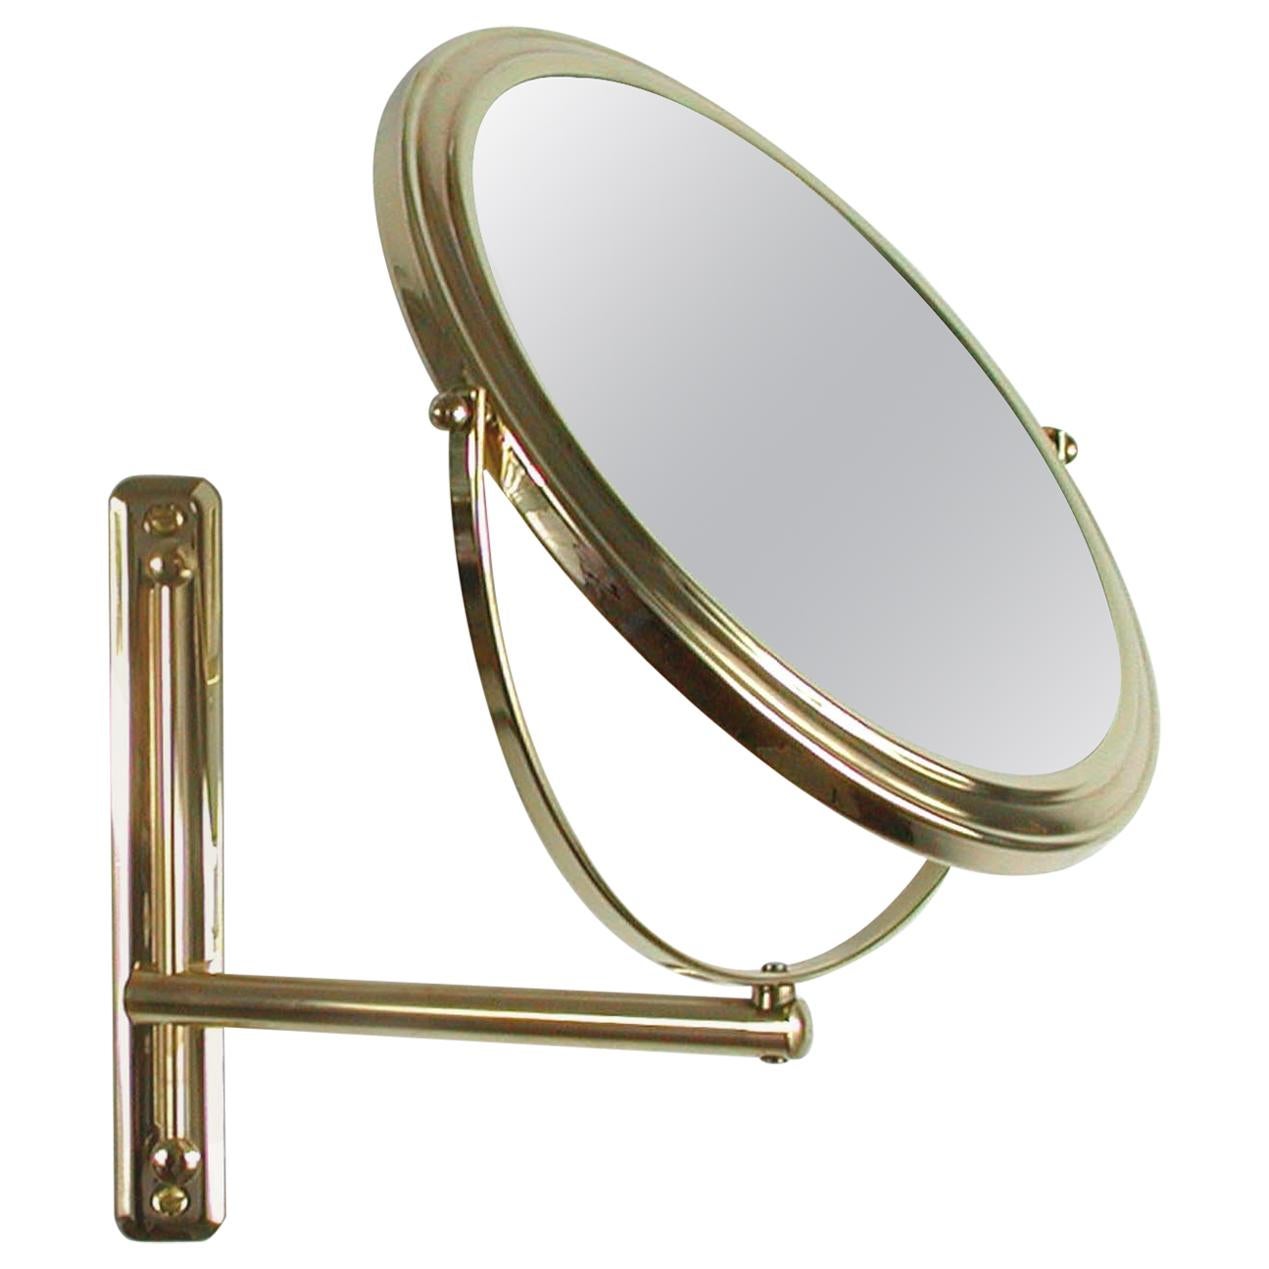 Italian Articulating and Adjustable Brass Vanity 2-Sided Wall Mirror, 1950s